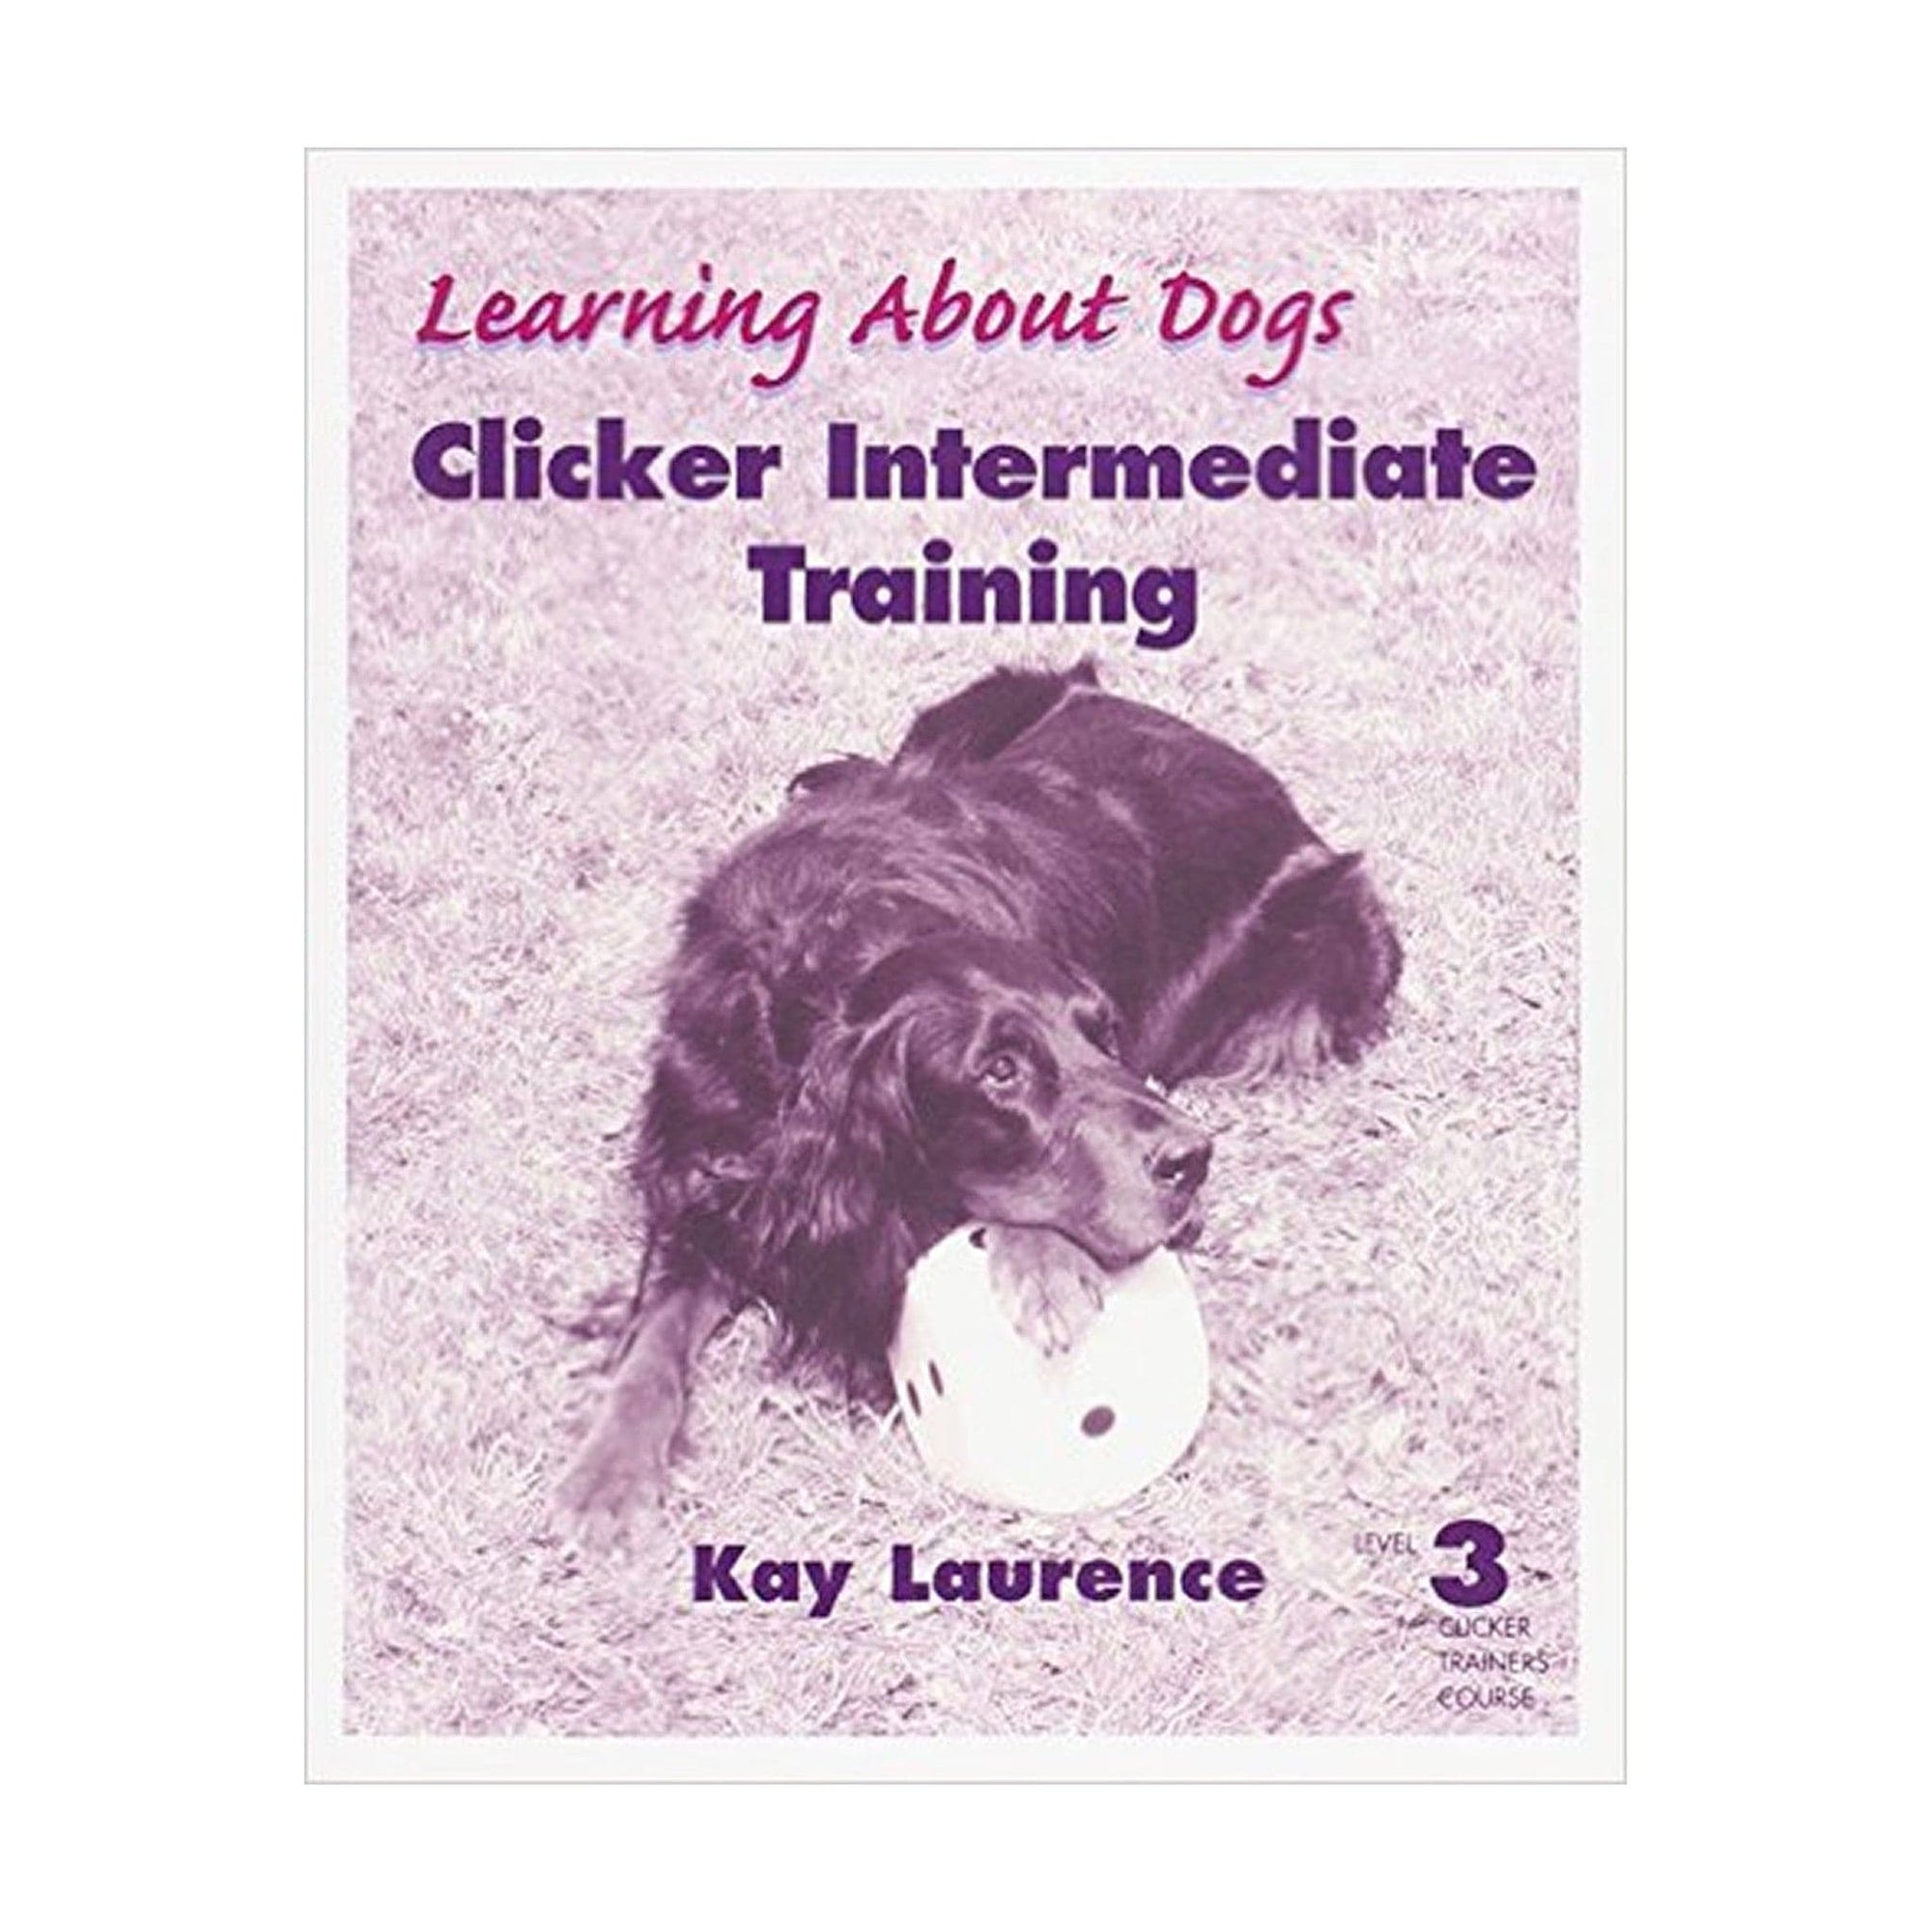 Clicker Intermediate Training: Level 3 Clicker Trainers Course by Kay Laurence